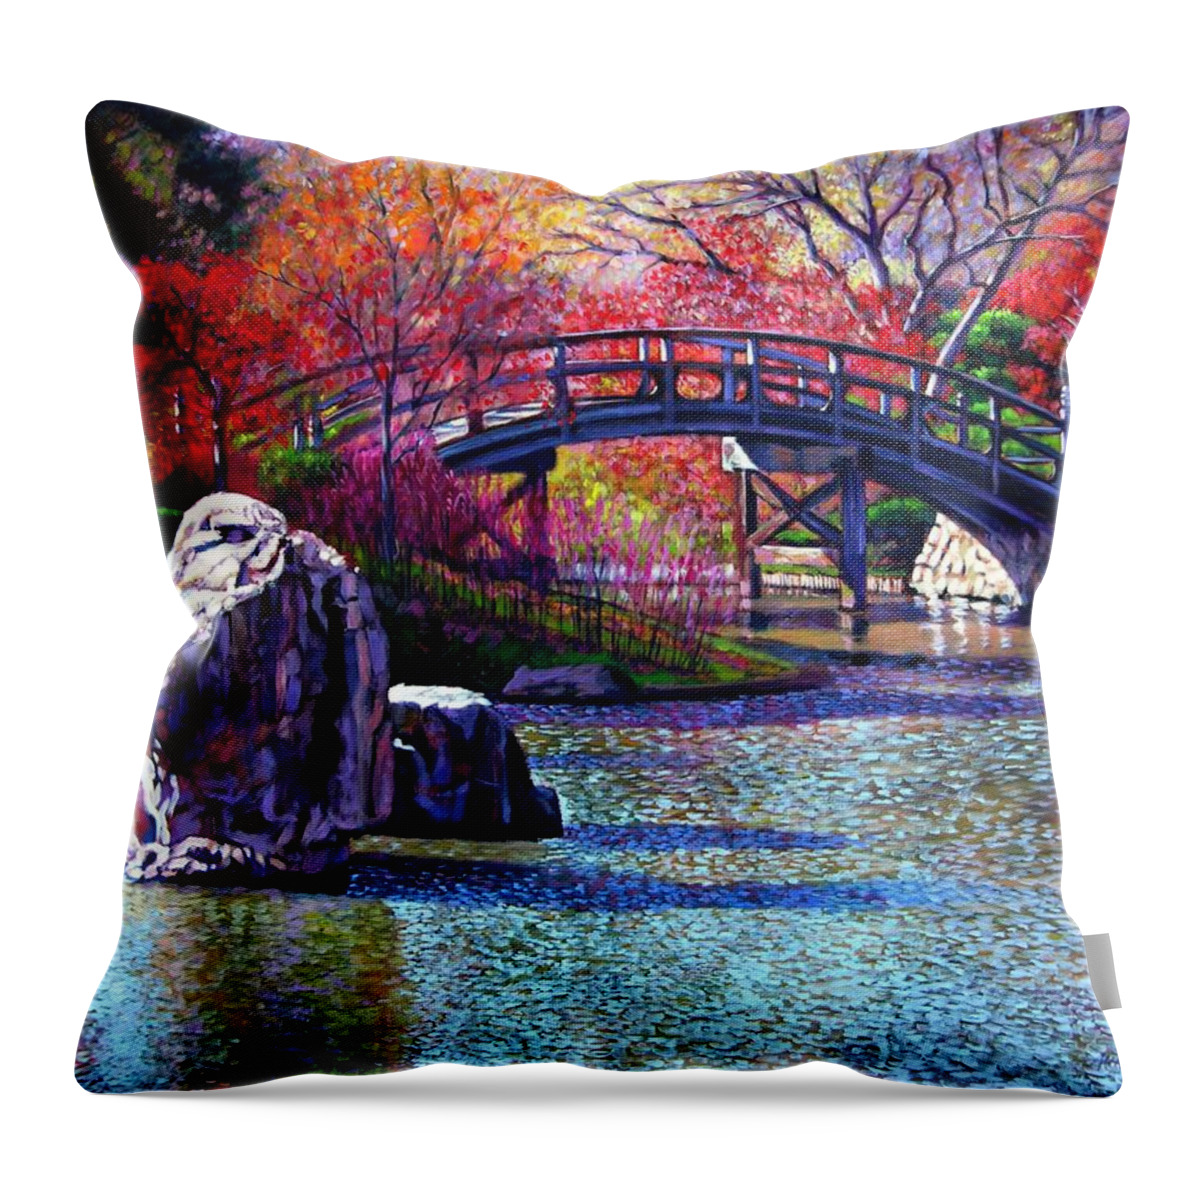 Garden Throw Pillow featuring the painting Fall In The Garden by John Lautermilch